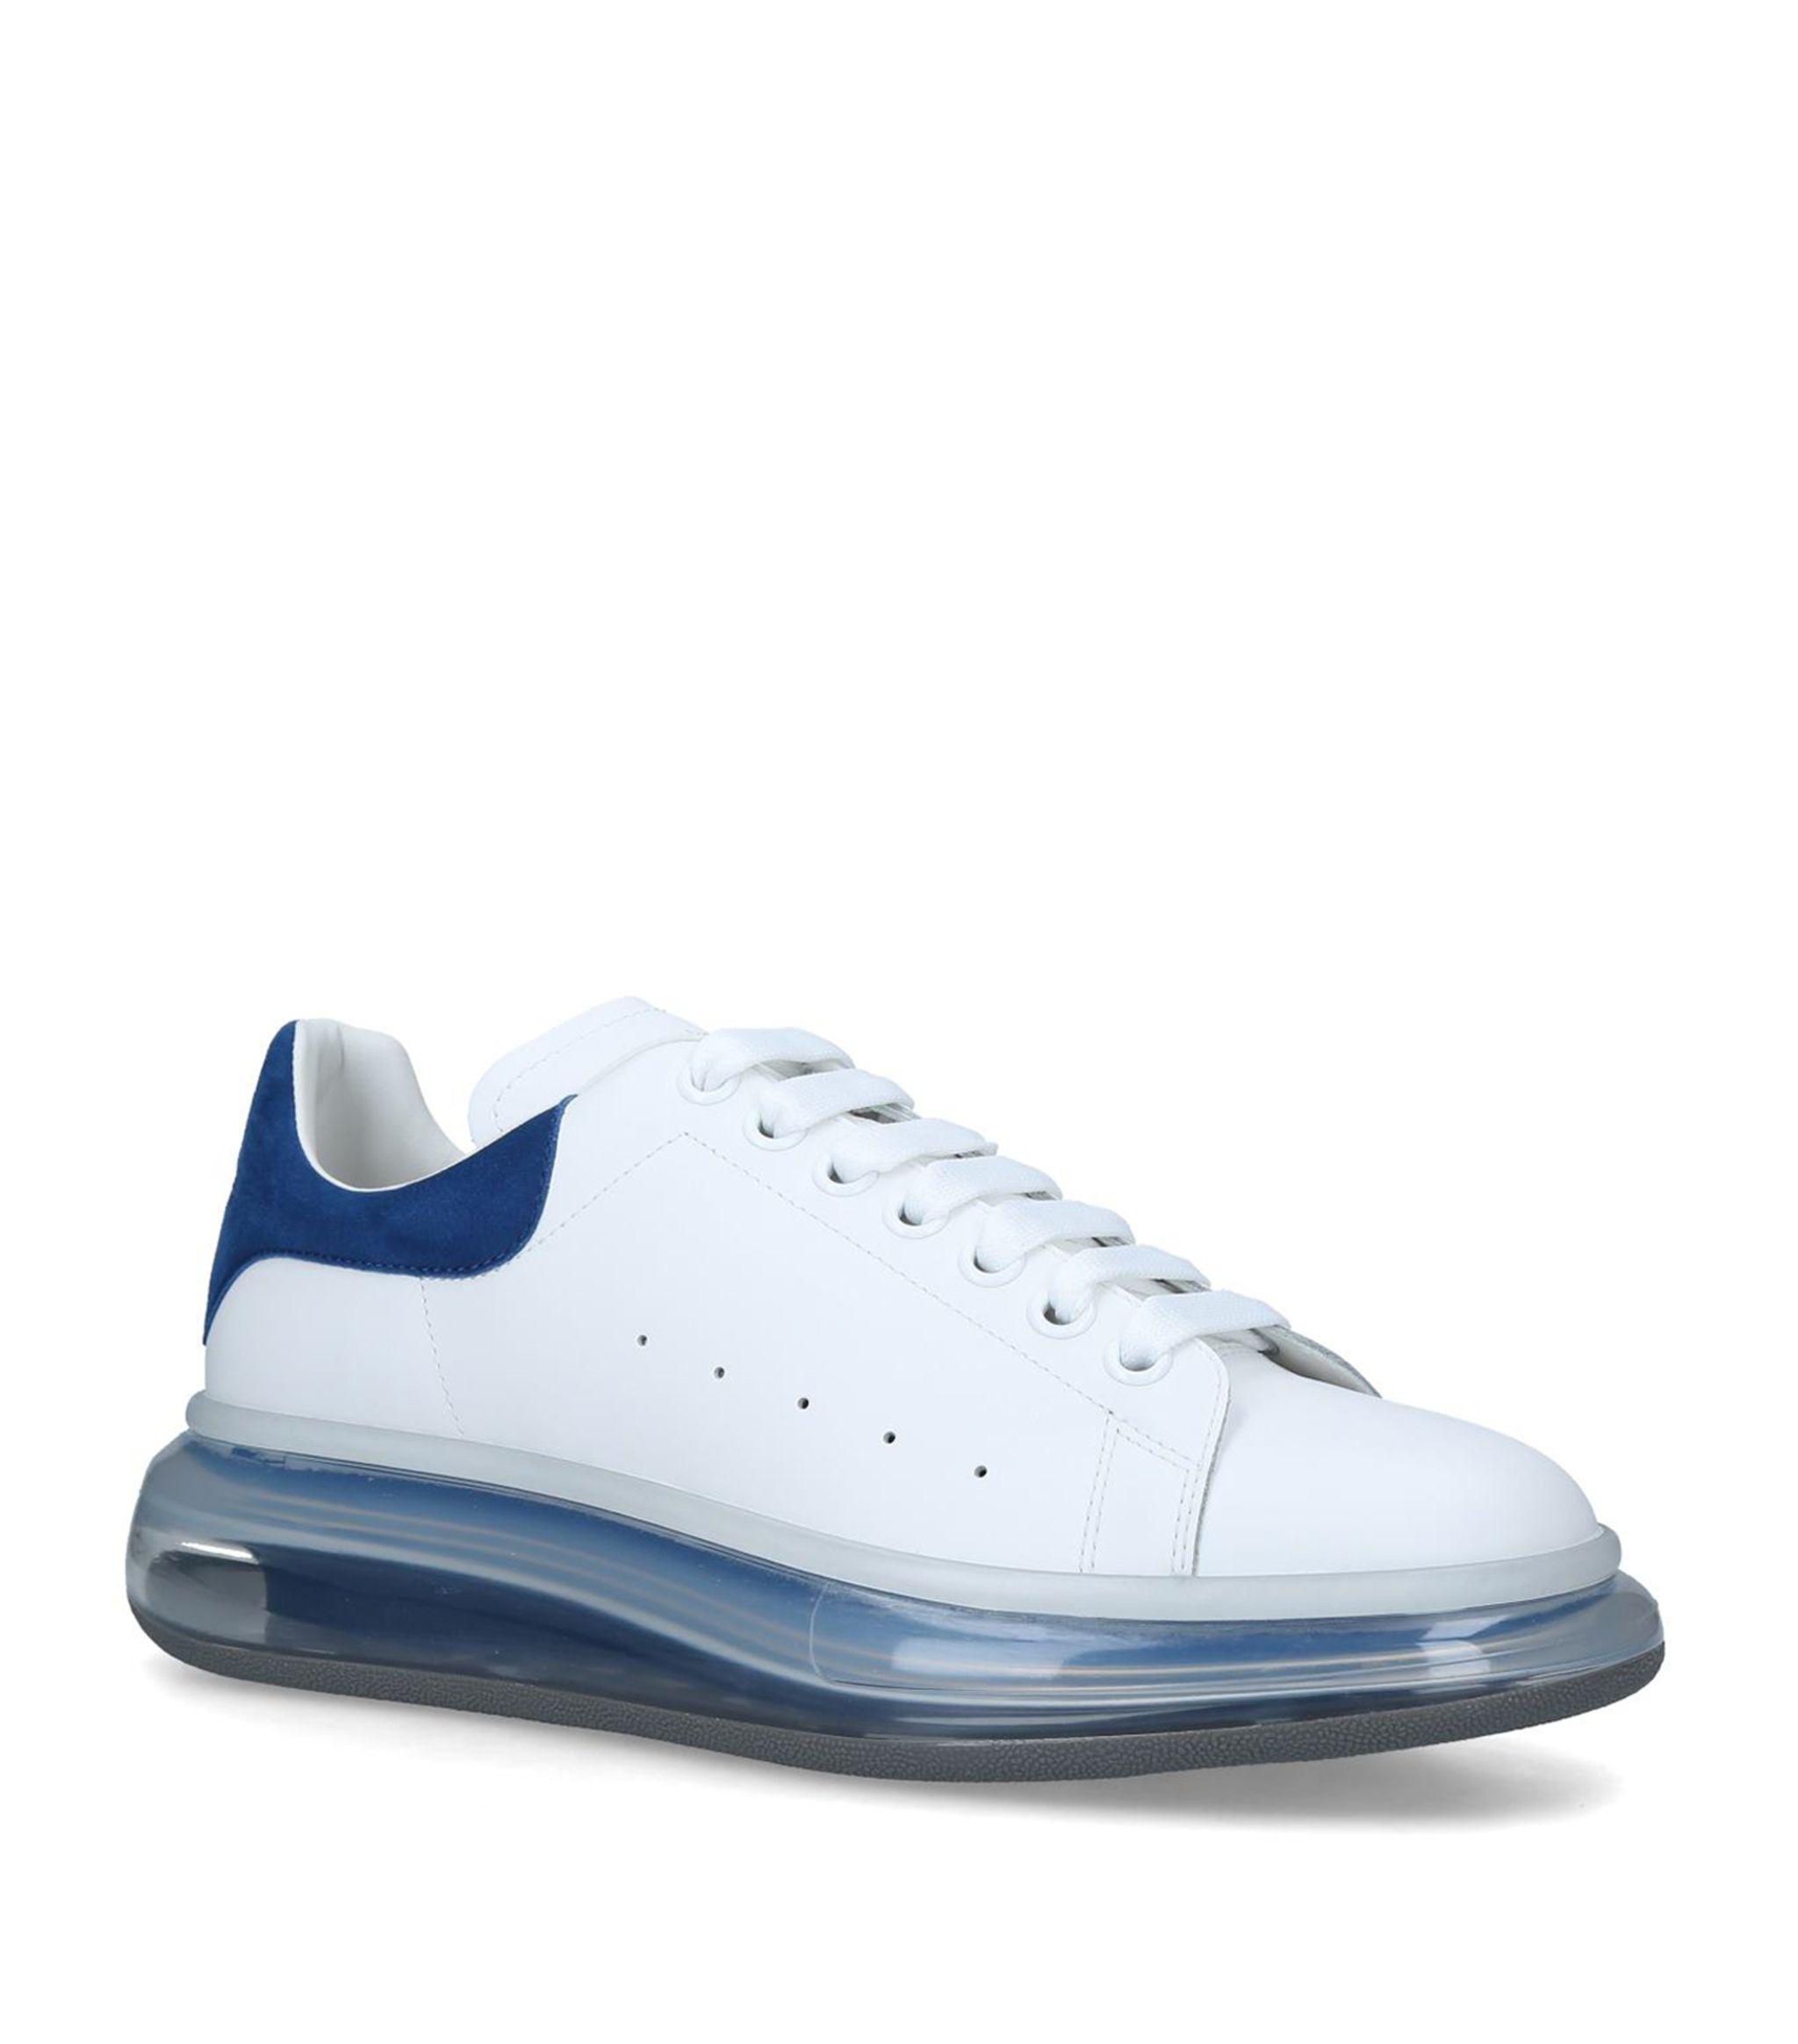 Alexander McQueen Leather Hex Show Bubble Sneakers in White for Men - Lyst